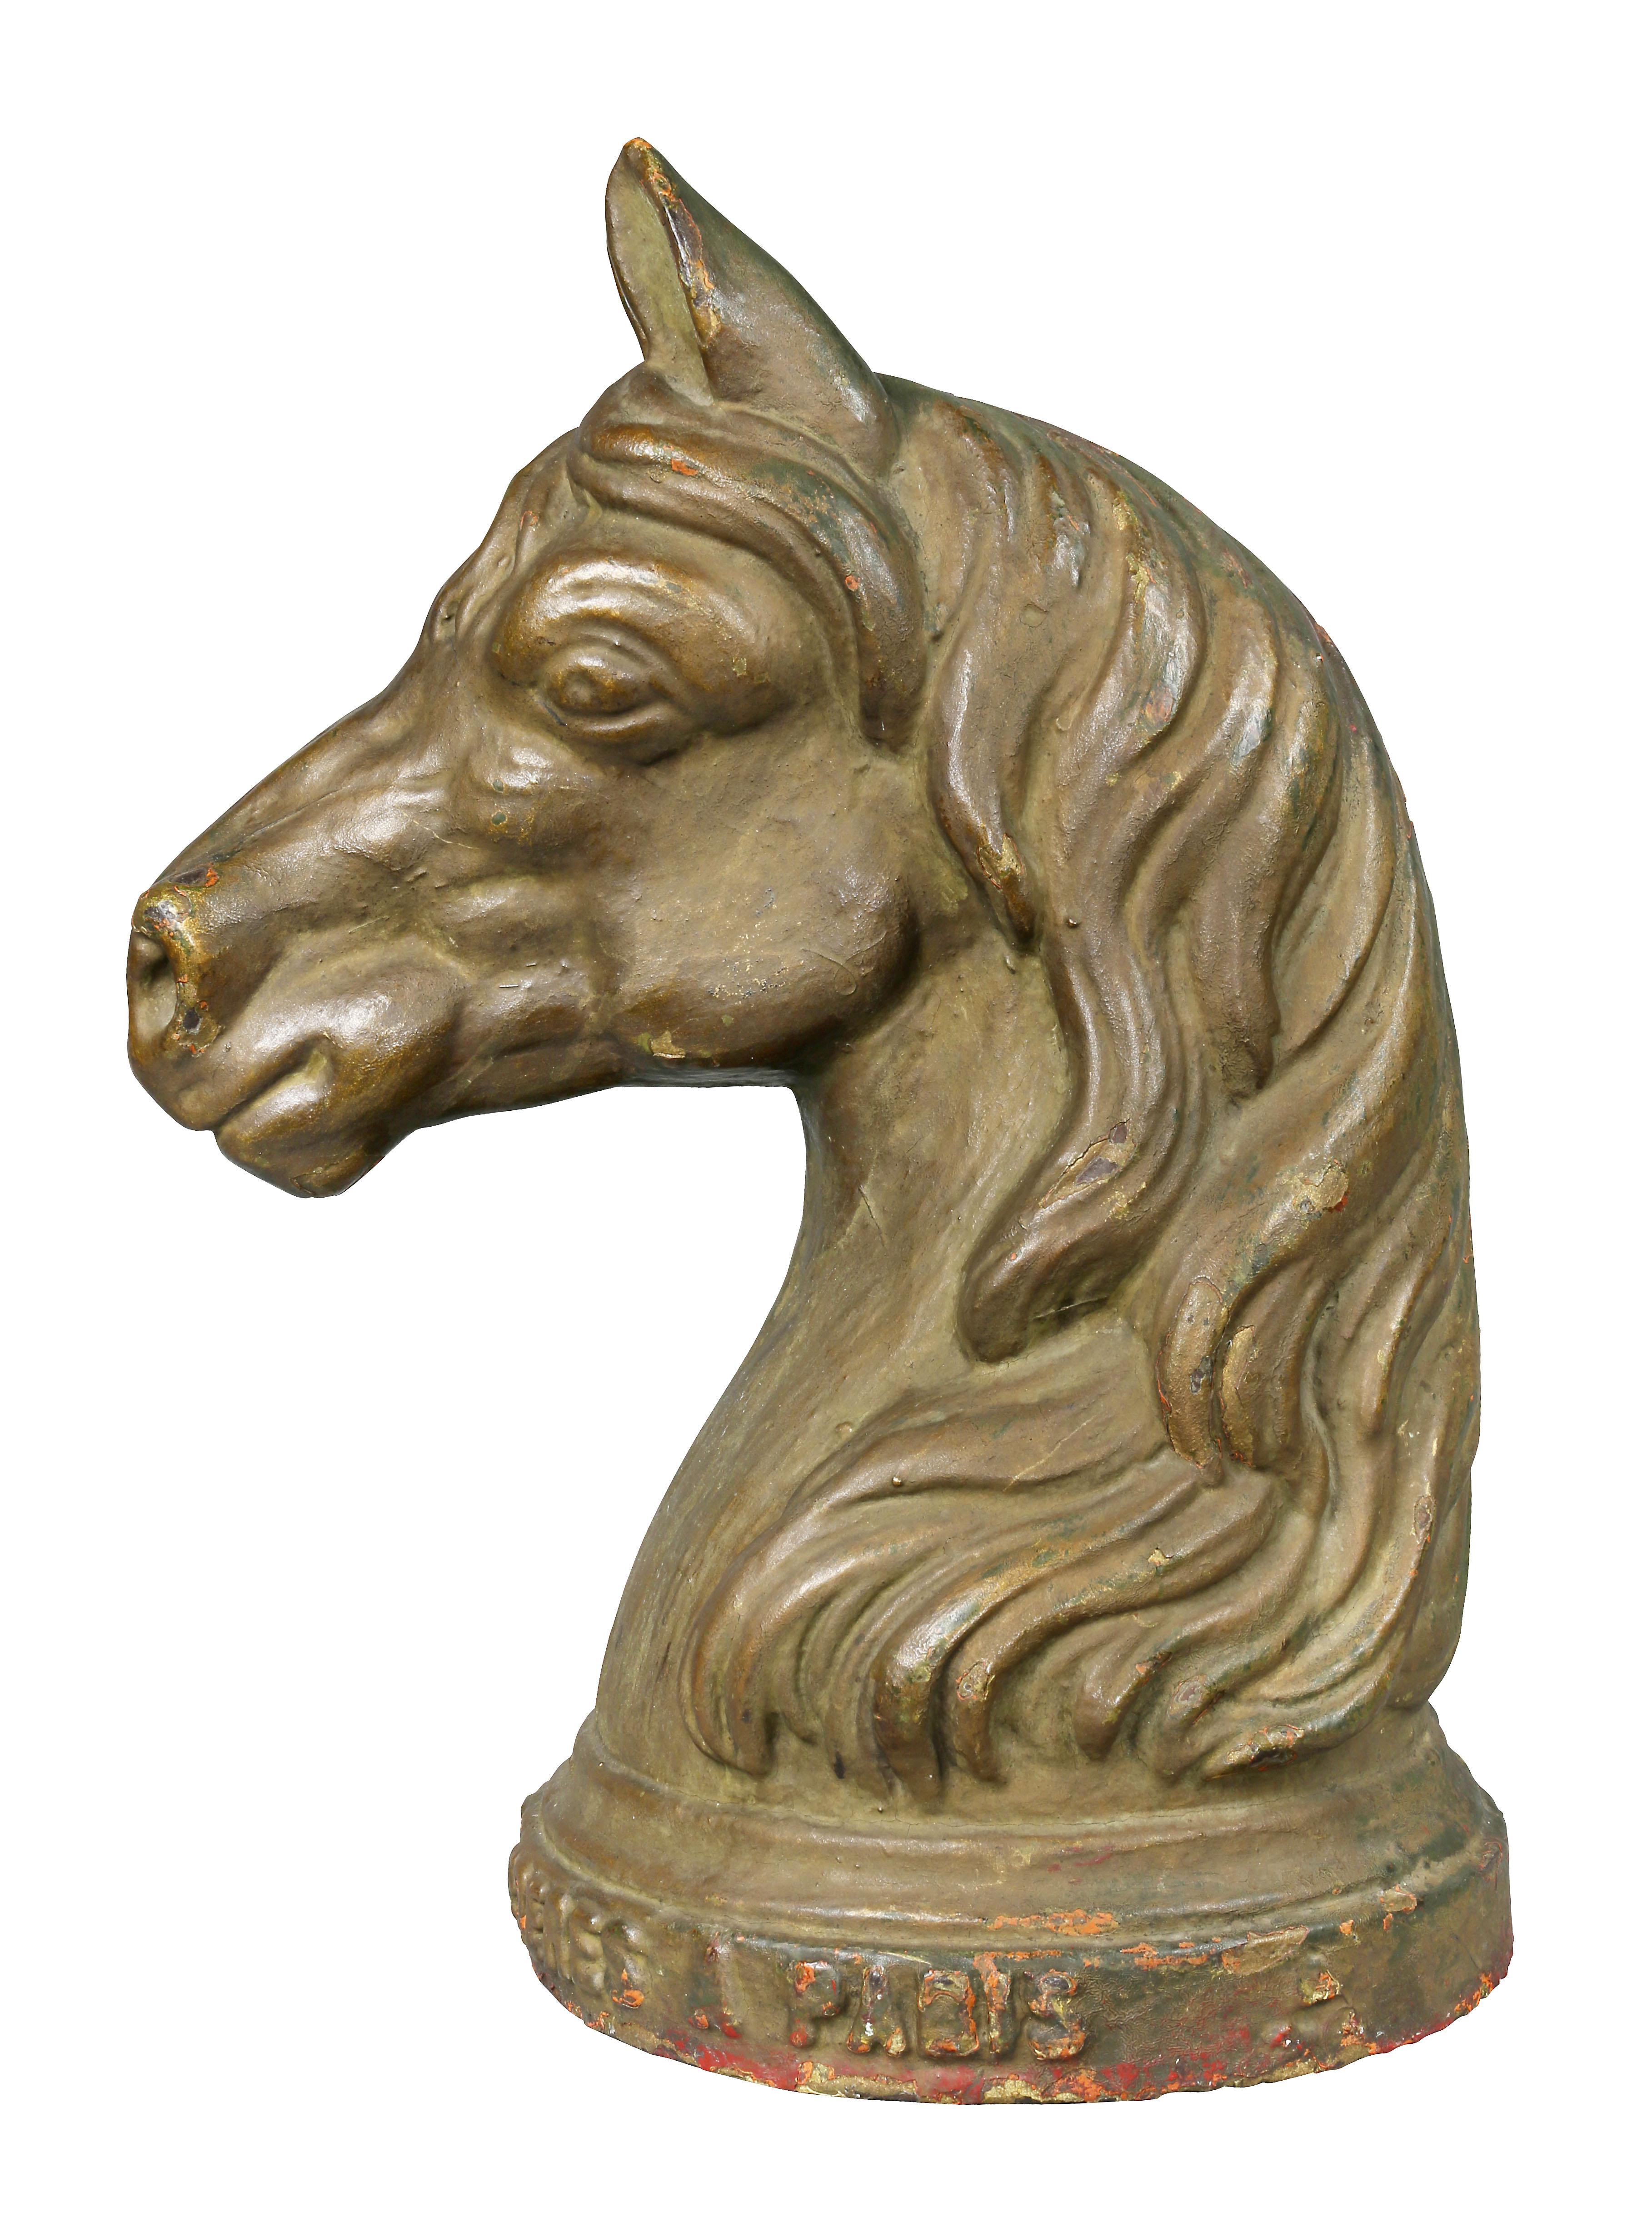 horse hitching post for sale